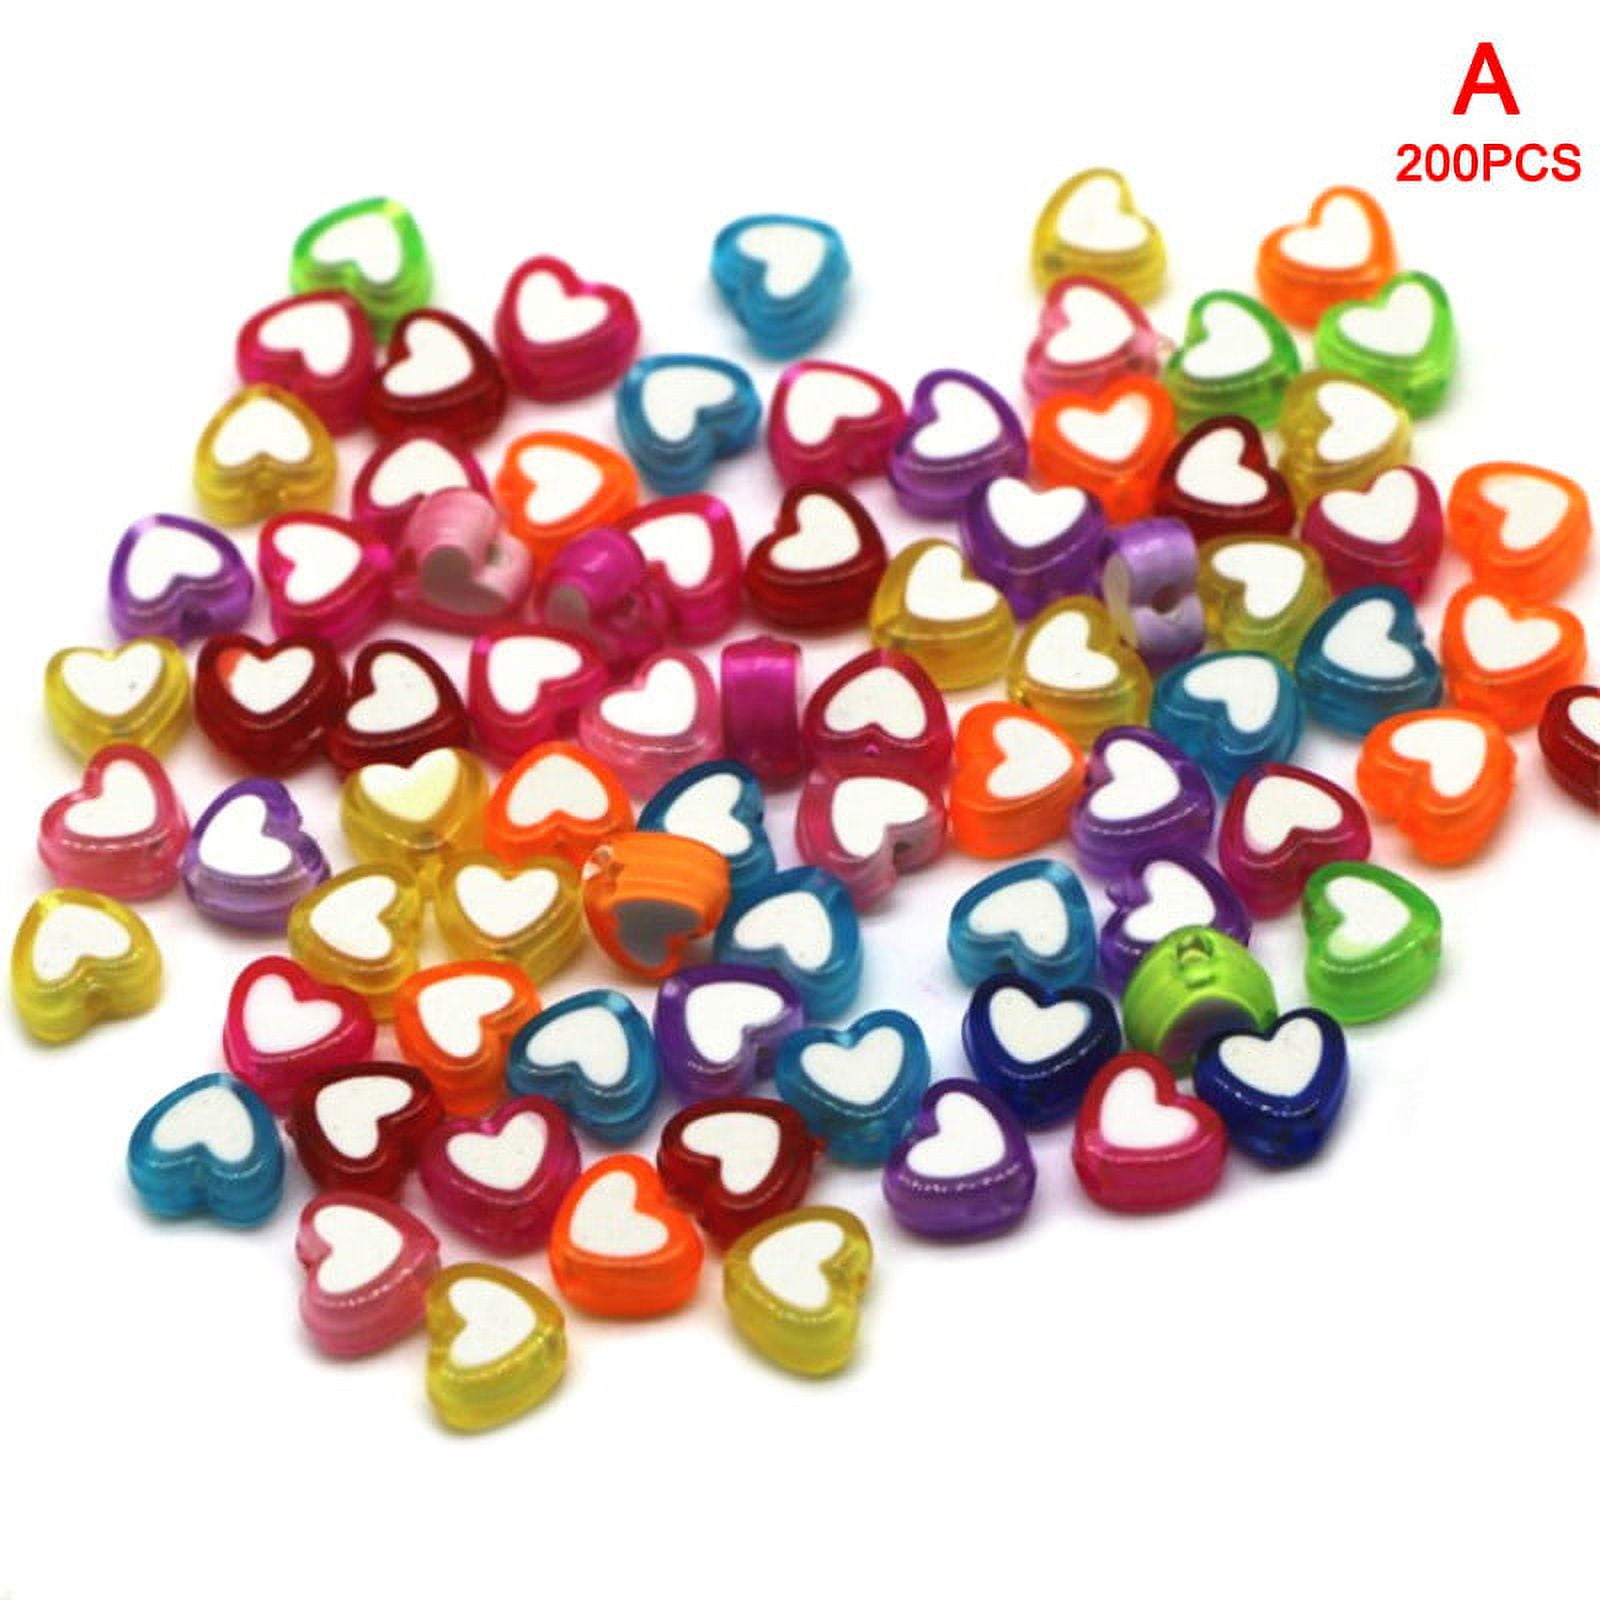  Melius 500pcs Acrylic Heart Beads for Bracelets Jewelry Making  DIY Crafts (4 * 7 Round, Gold Heart)